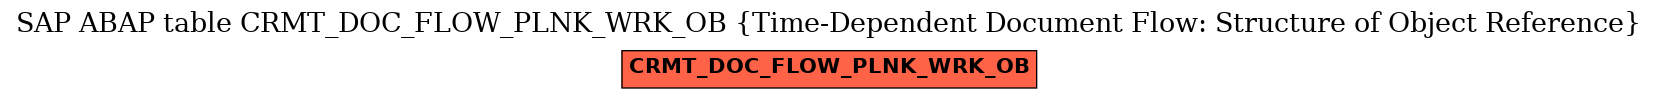 E-R Diagram for table CRMT_DOC_FLOW_PLNK_WRK_OB (Time-Dependent Document Flow: Structure of Object Reference)